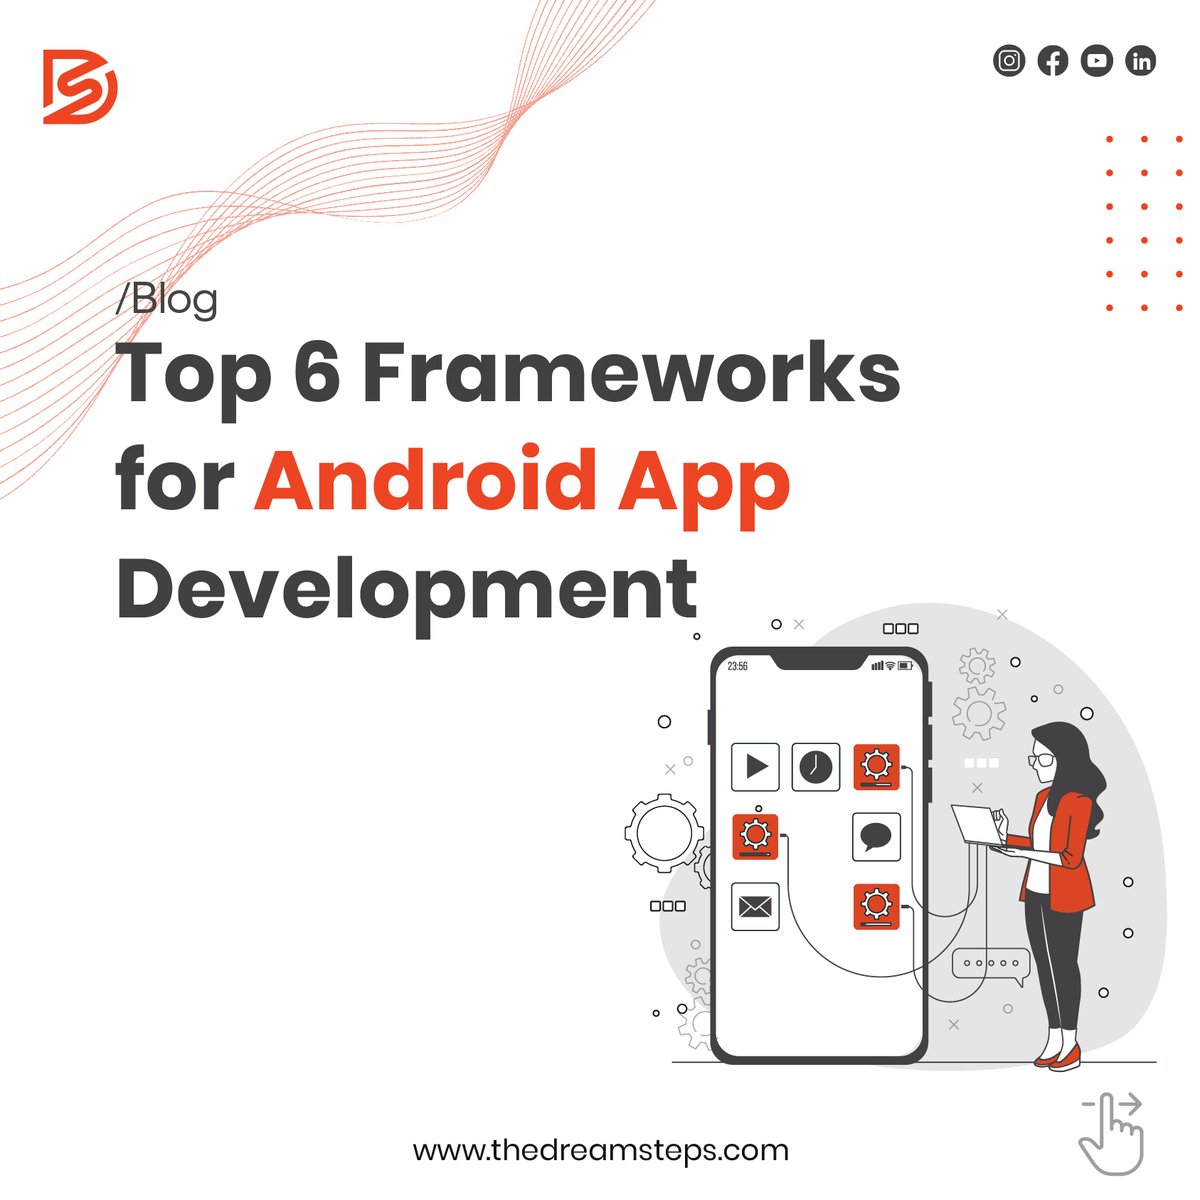 Check out the full blog: bit.ly/3UktqKx.

#AndroidDevlopment #AppDevelopment #Frameworks #AndroidApp #MobileApplication #Dreamers #TeamDreamSteps